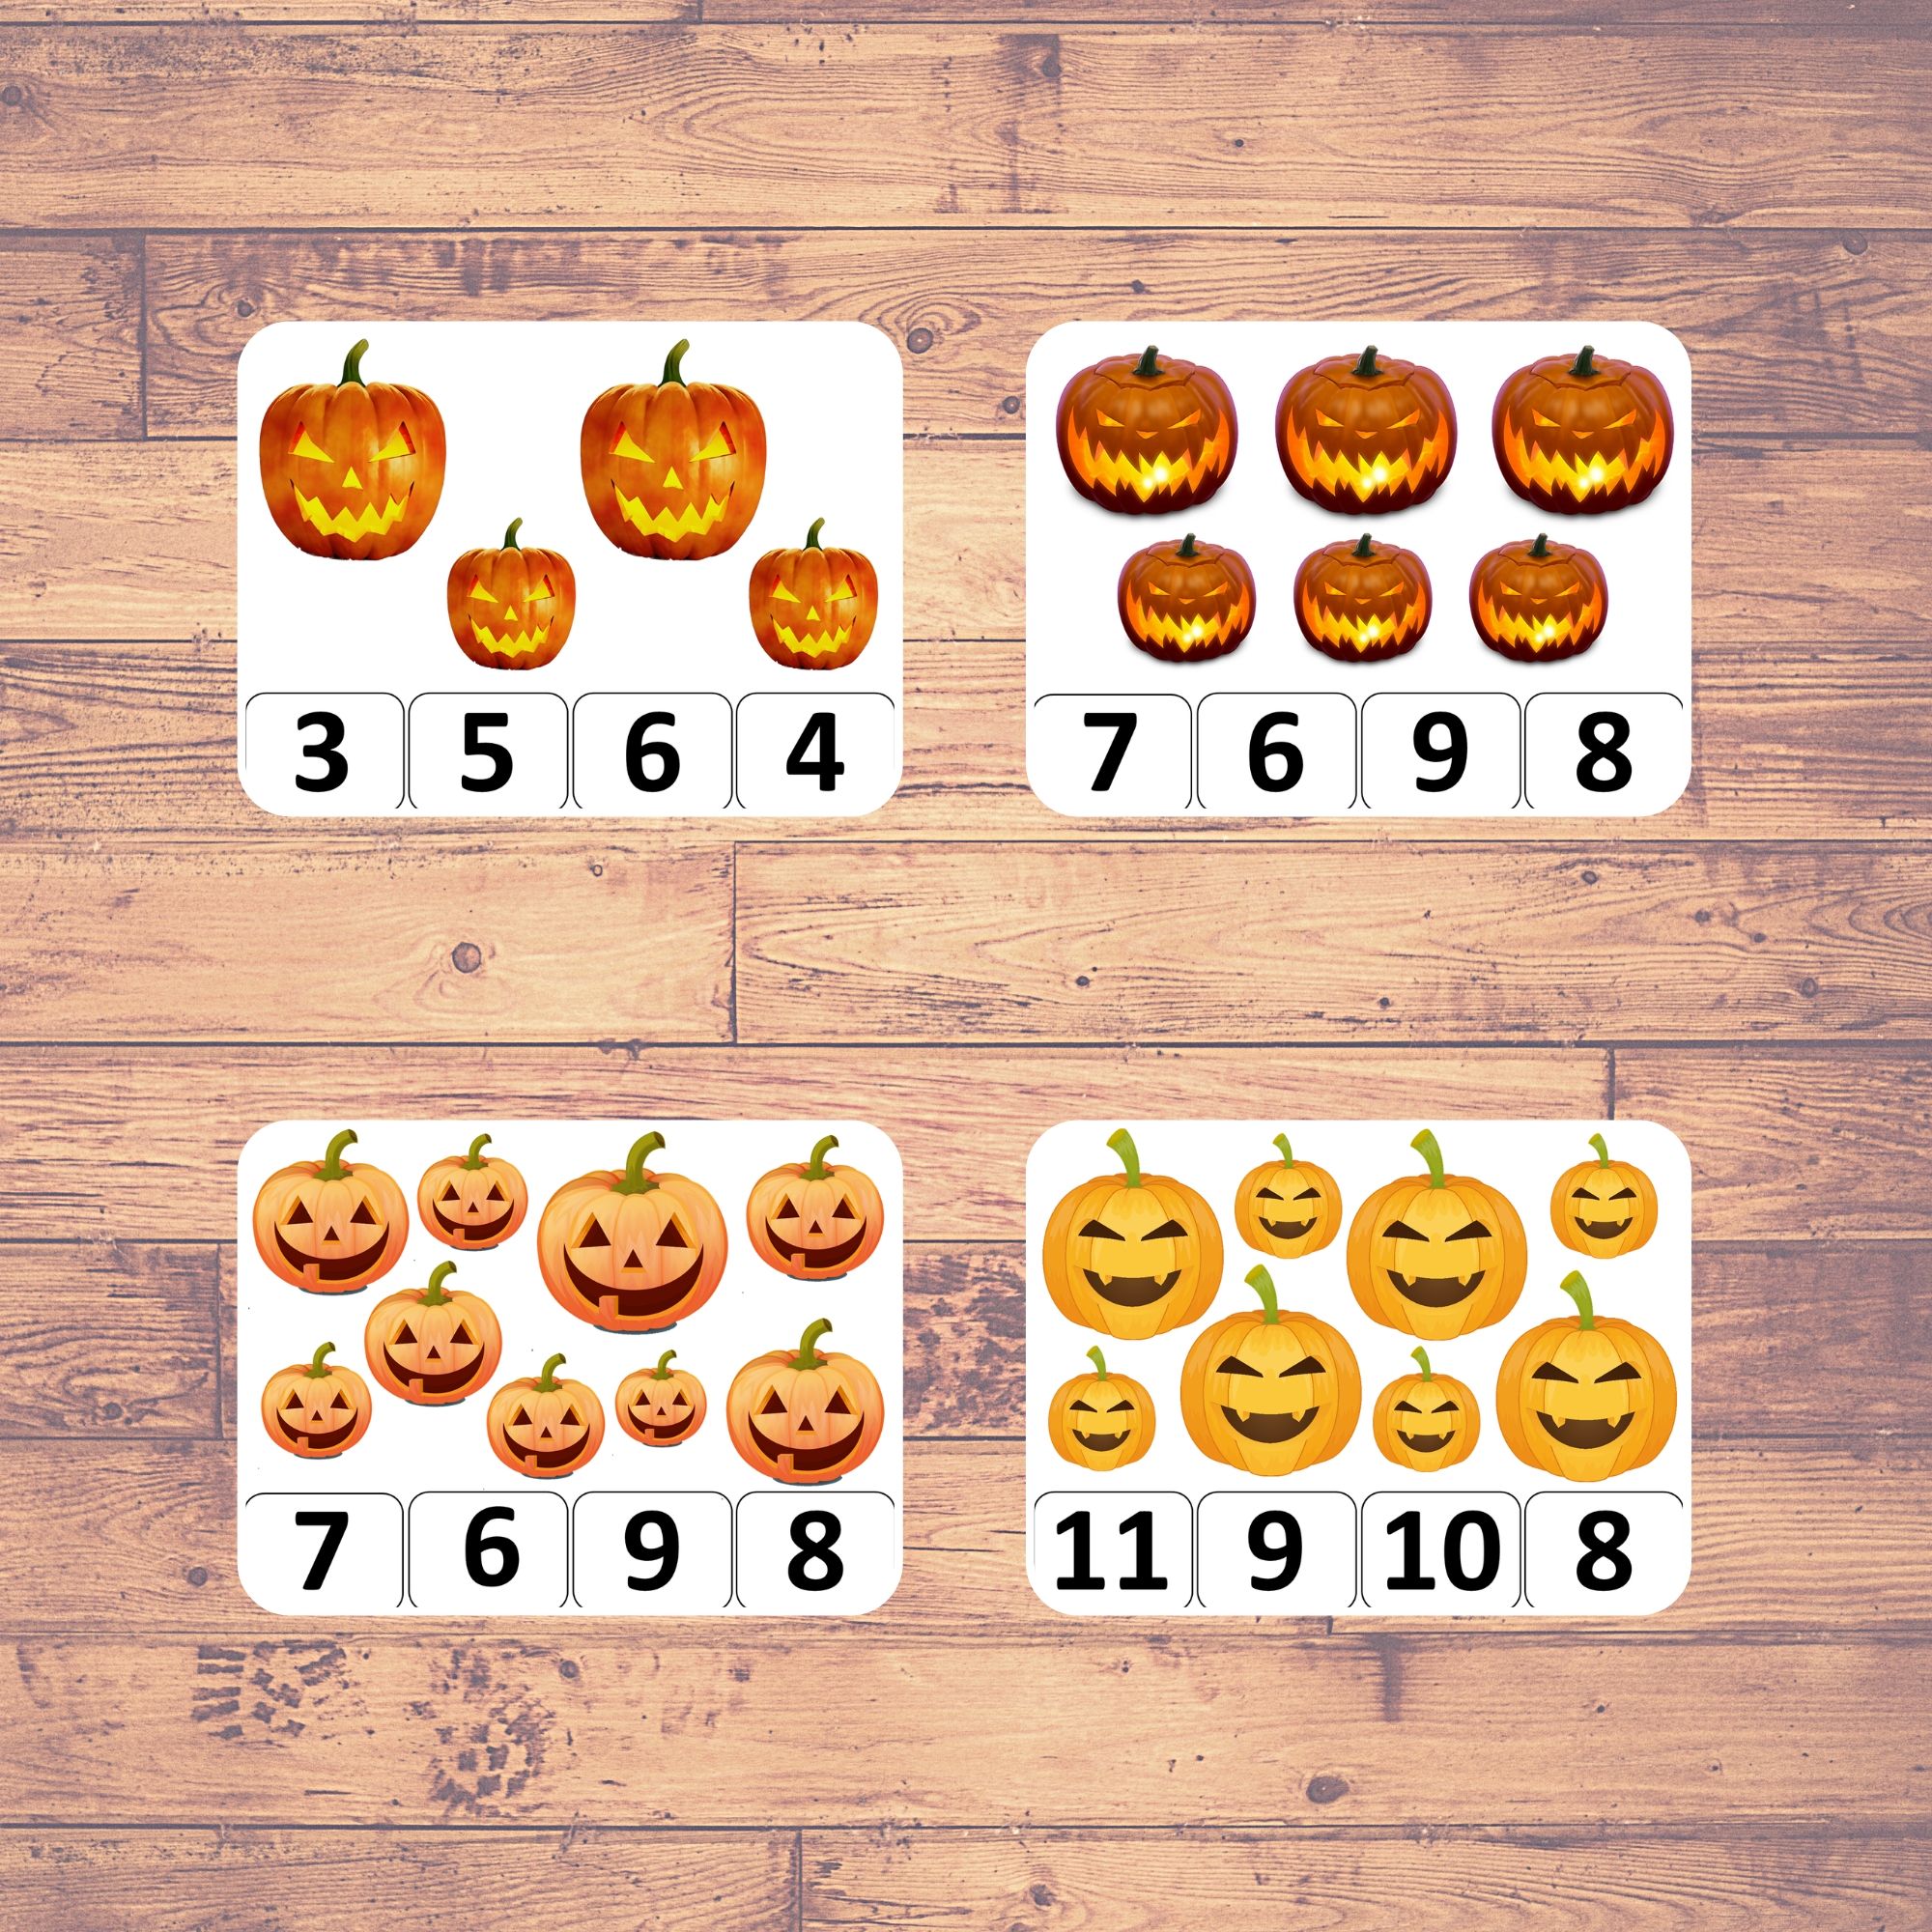 COUNTING PUMPKINS Clip Counting Cards Montessori Educational